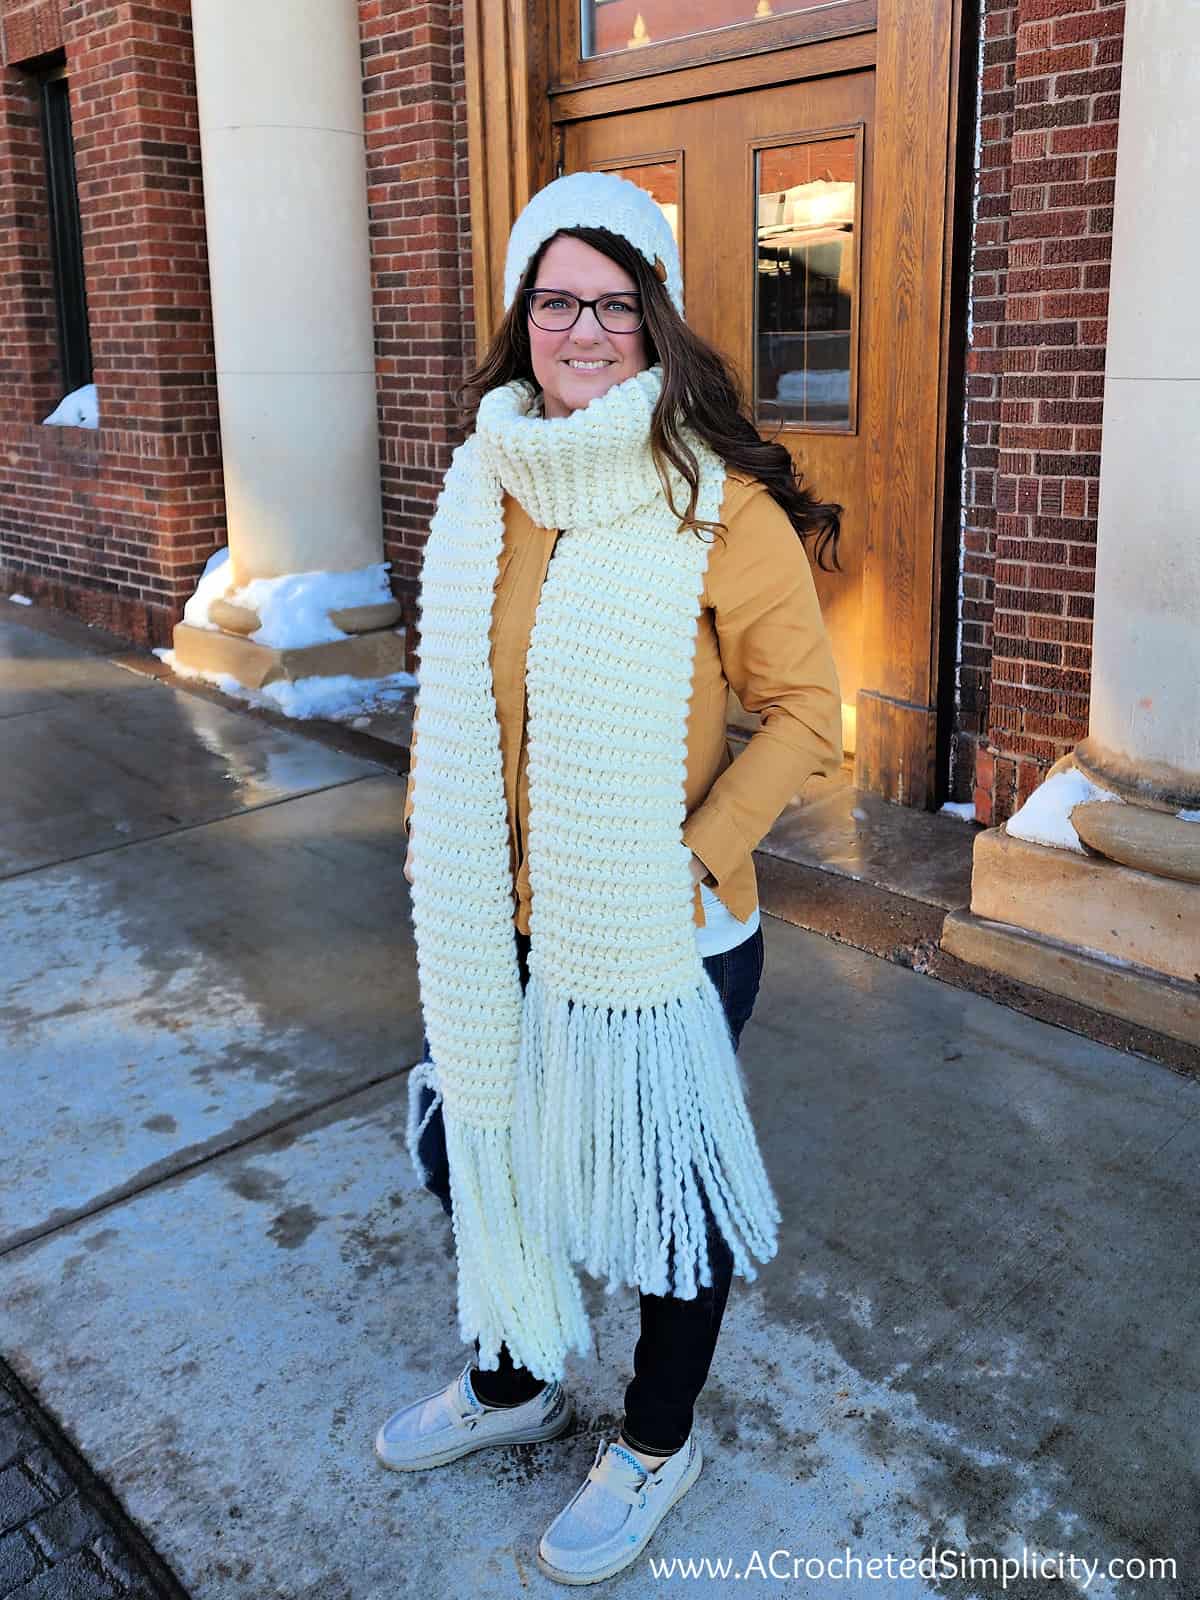 Woman modeling a wide knit look crochet scarf and beanie in cream.